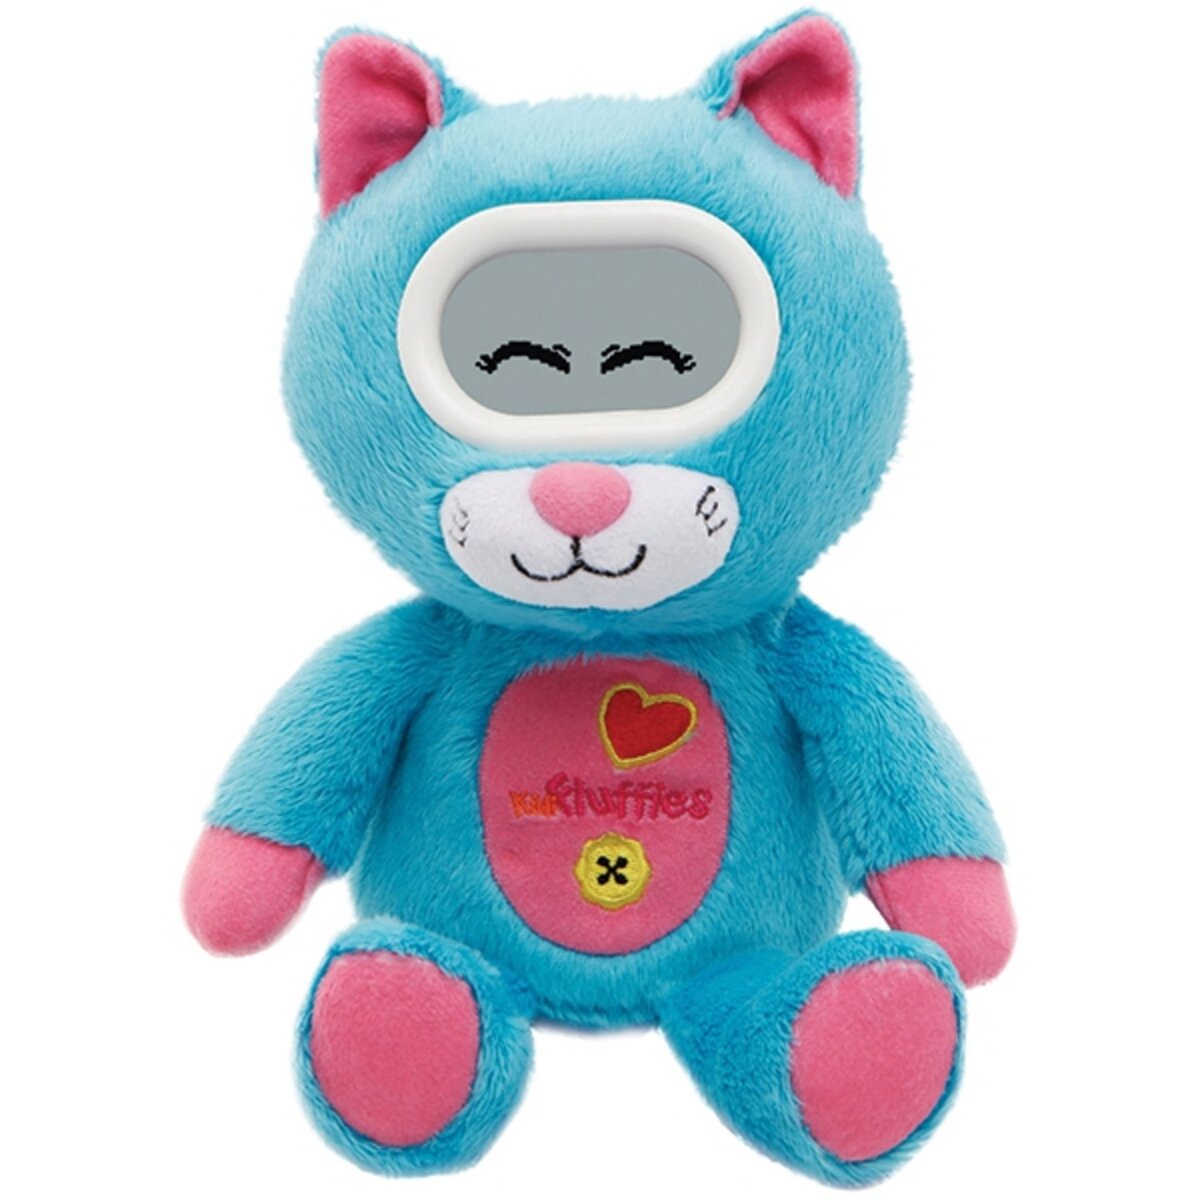 VTECH Peluche kidifluffies Twisty chat